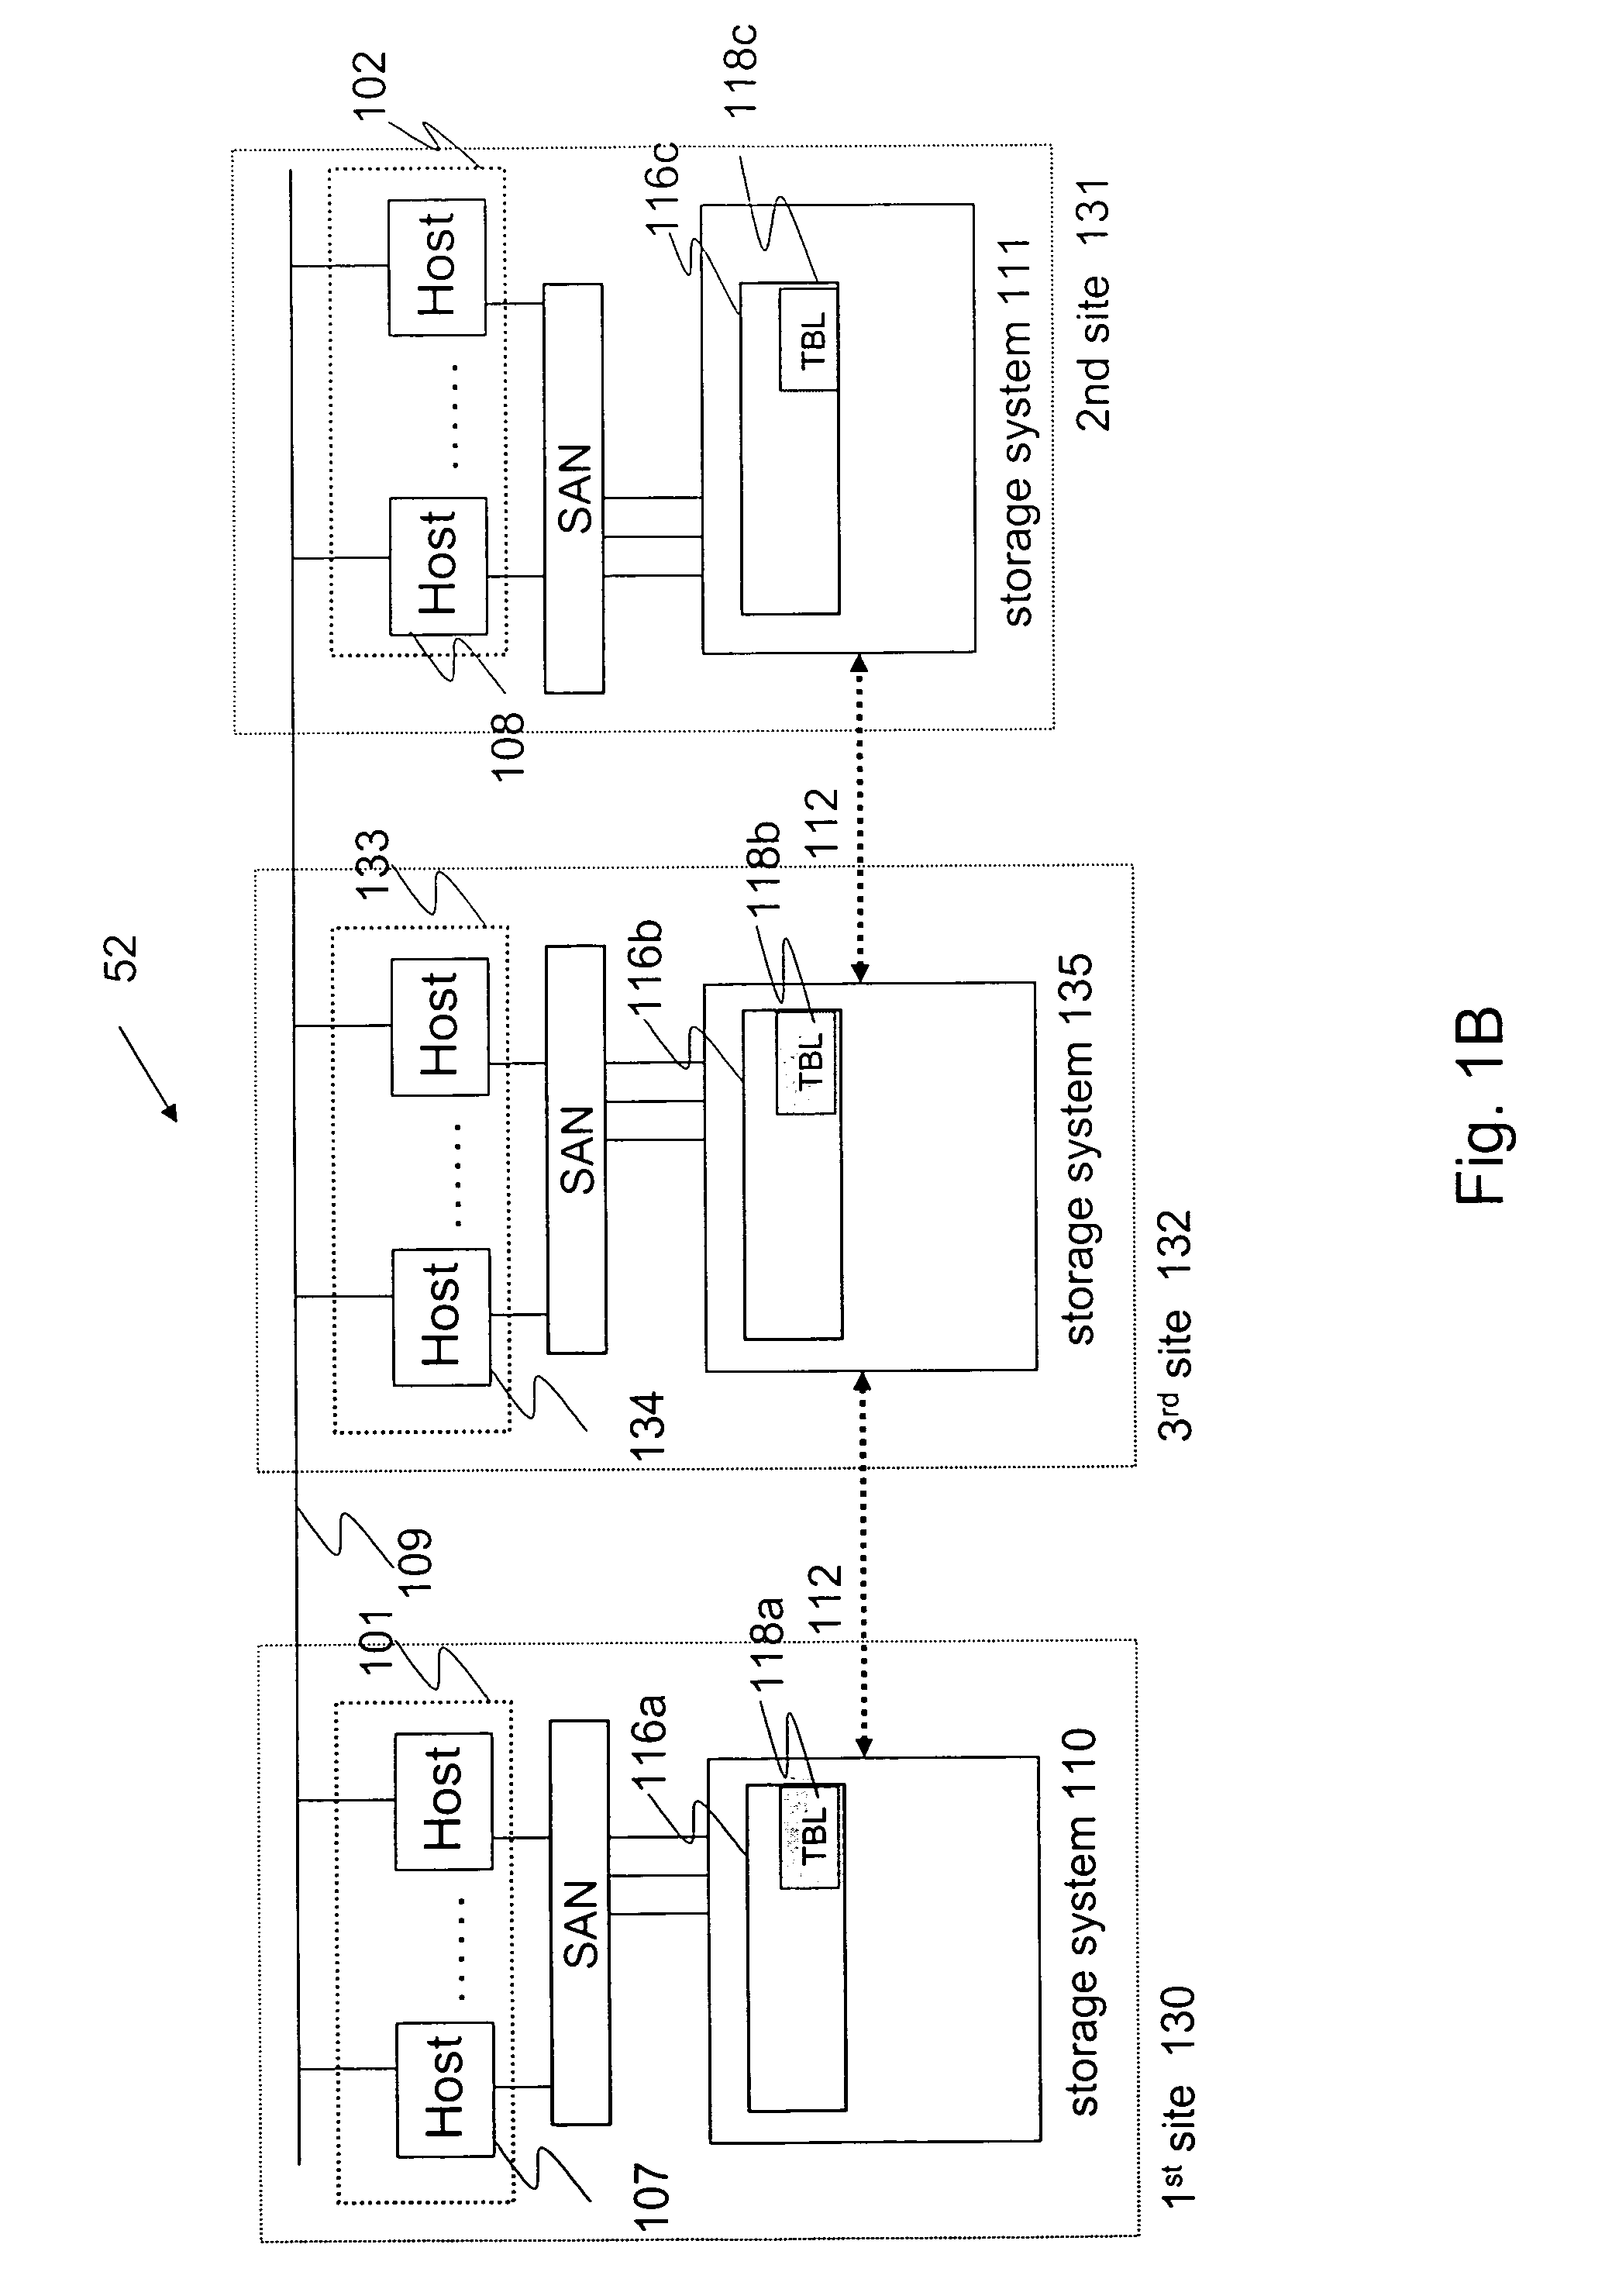 Apparatus and method of heartbeat mechanism using remote mirroring link for multiple storage system